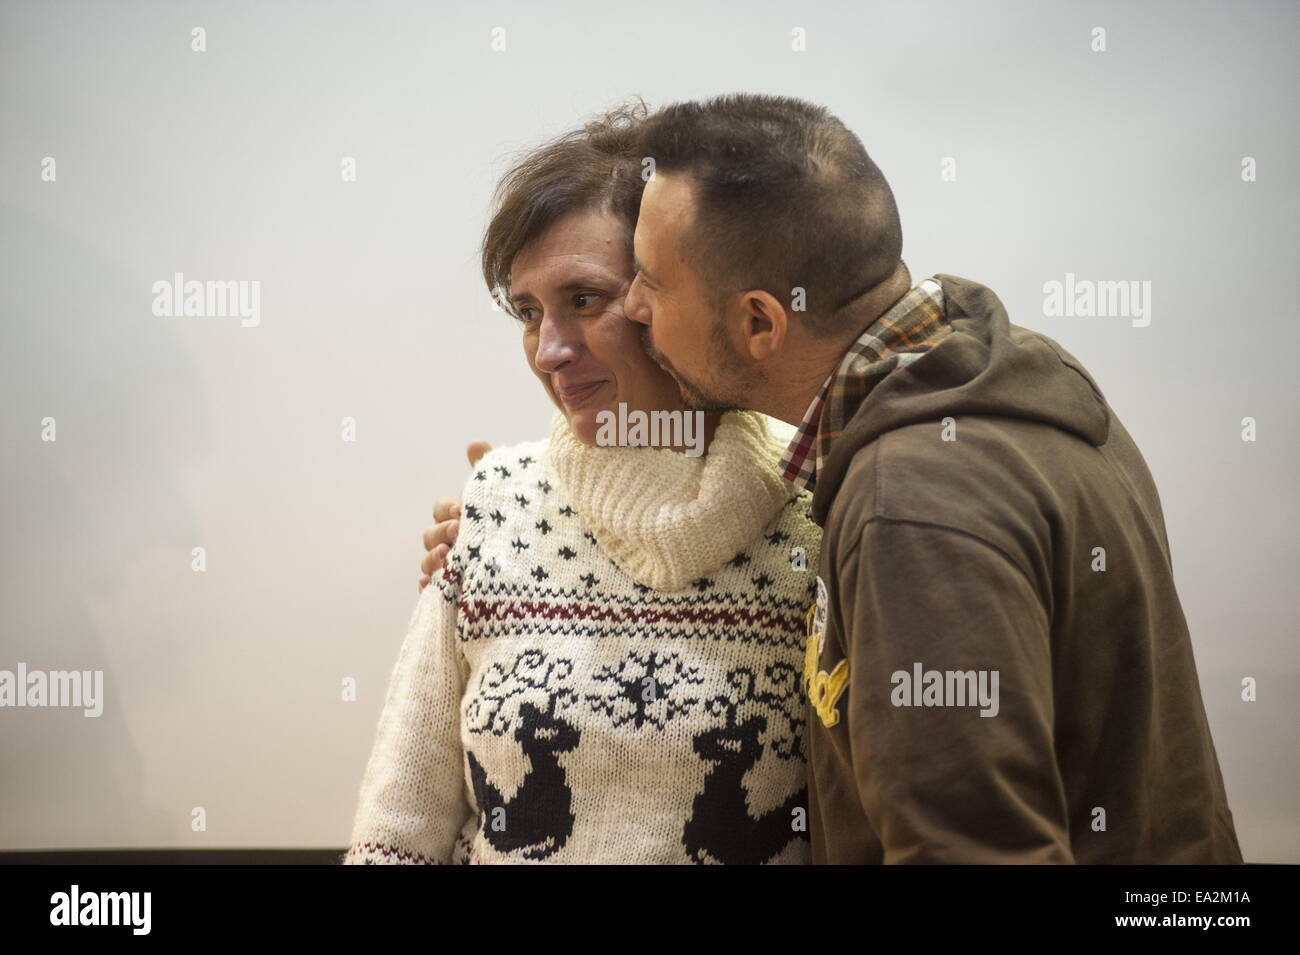 Madrid, Spain. 5th Nov, 2014. TERESA ROMERO, left, was kissed by her husband JAVIER LIMON after she was discharged from hospital. Romero, a Spanish auxiliary nurse who was the first person to be infected by Ebola outside of Africa, spoke after she was released from Carlos III hospital. © Nacho Guadano/ZUMA Wire/Alamy Live News Stock Photo